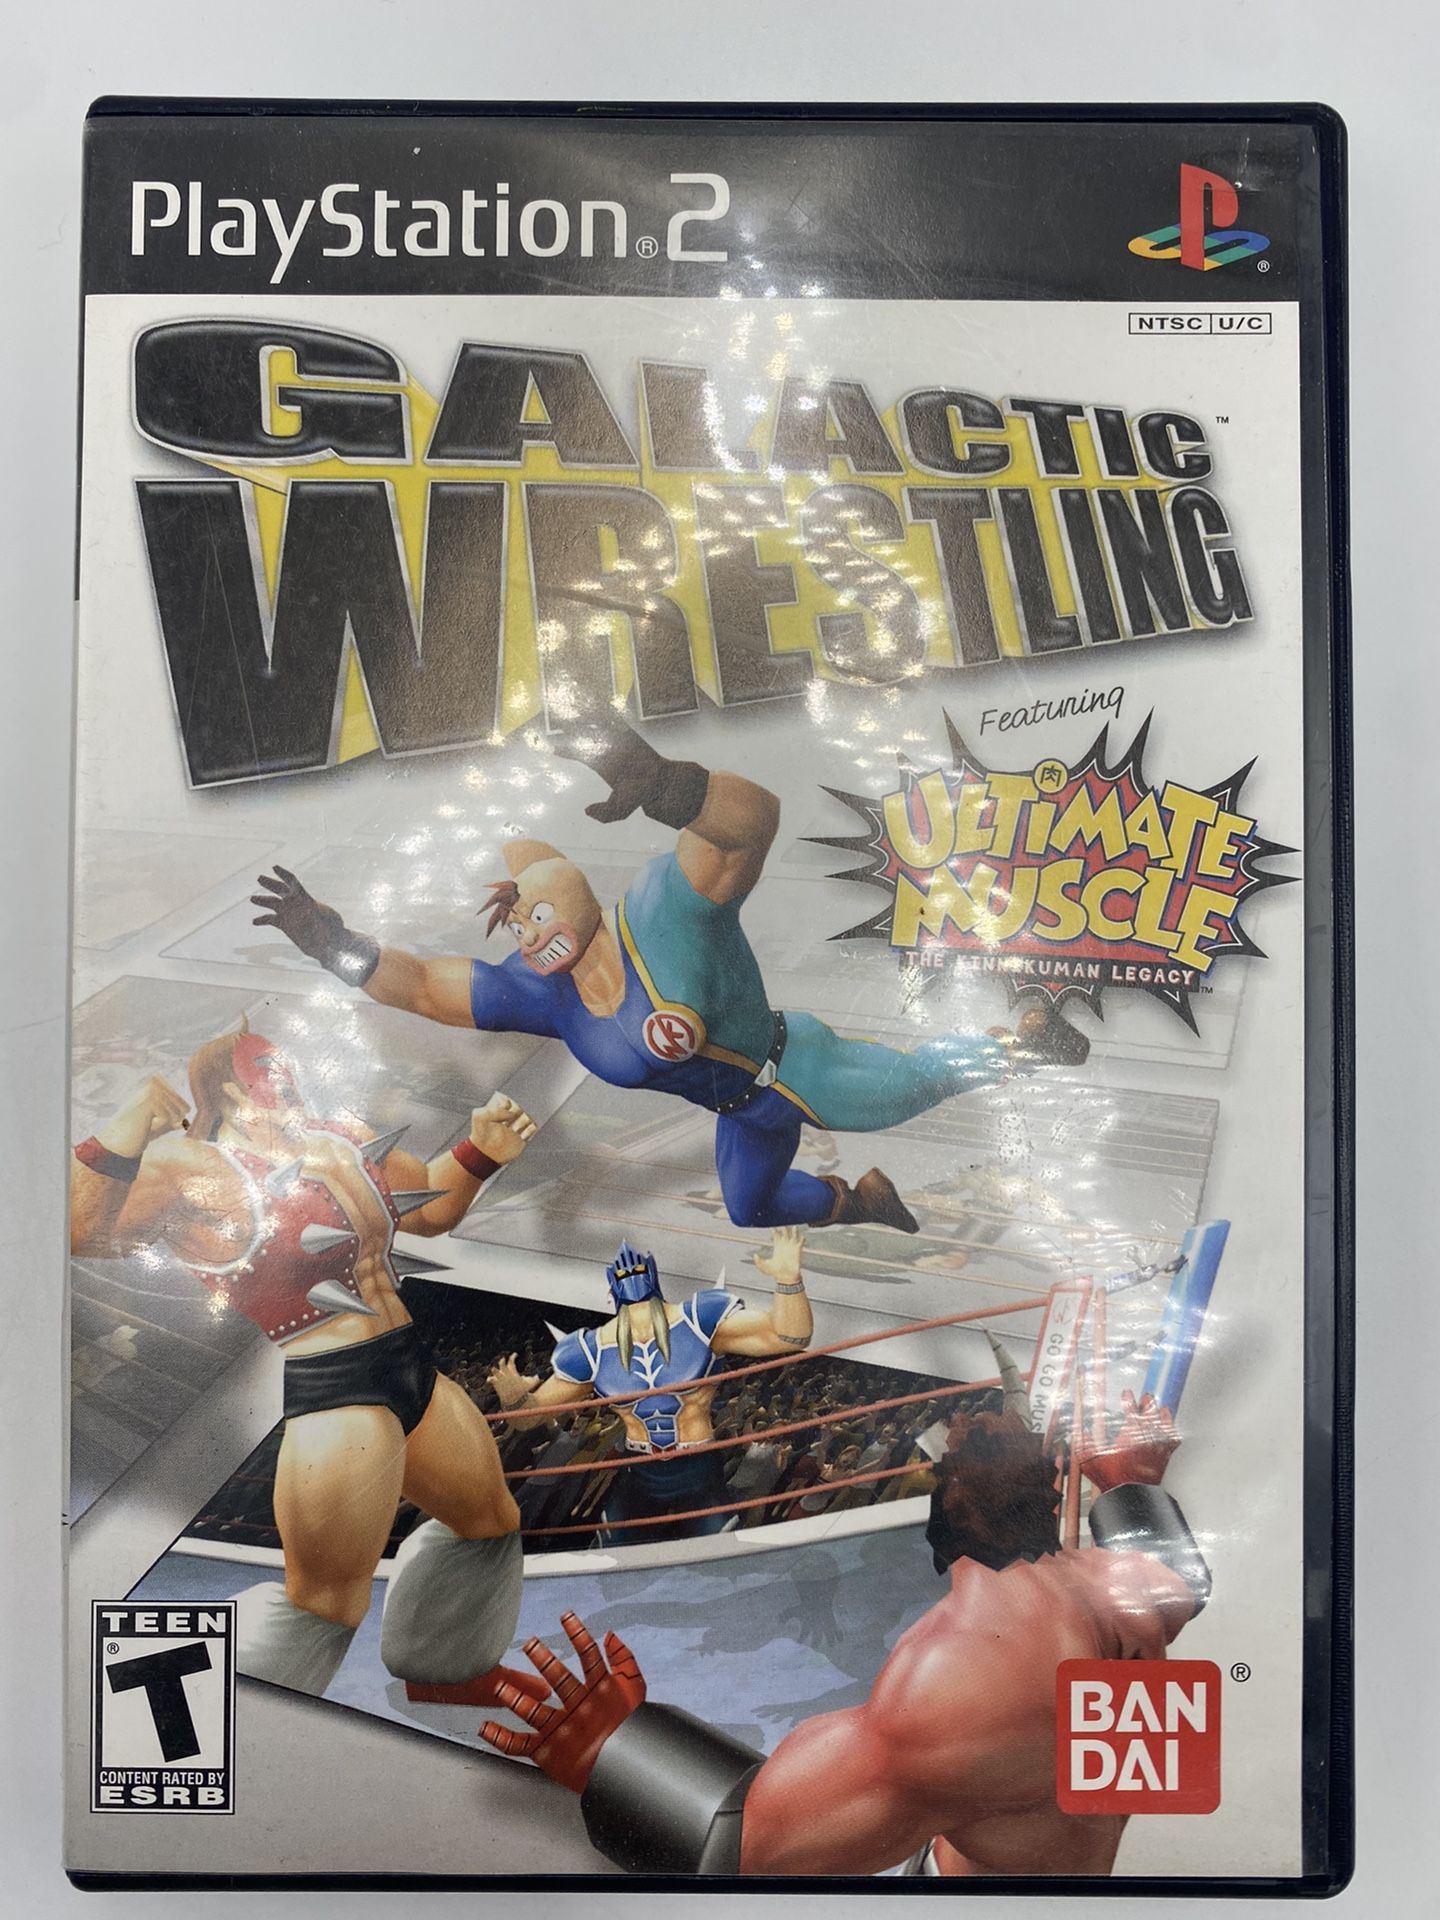 Galactic Wrestling Sony PlayStation 2 PS2 Complete in Box W/ Manual Tested Works